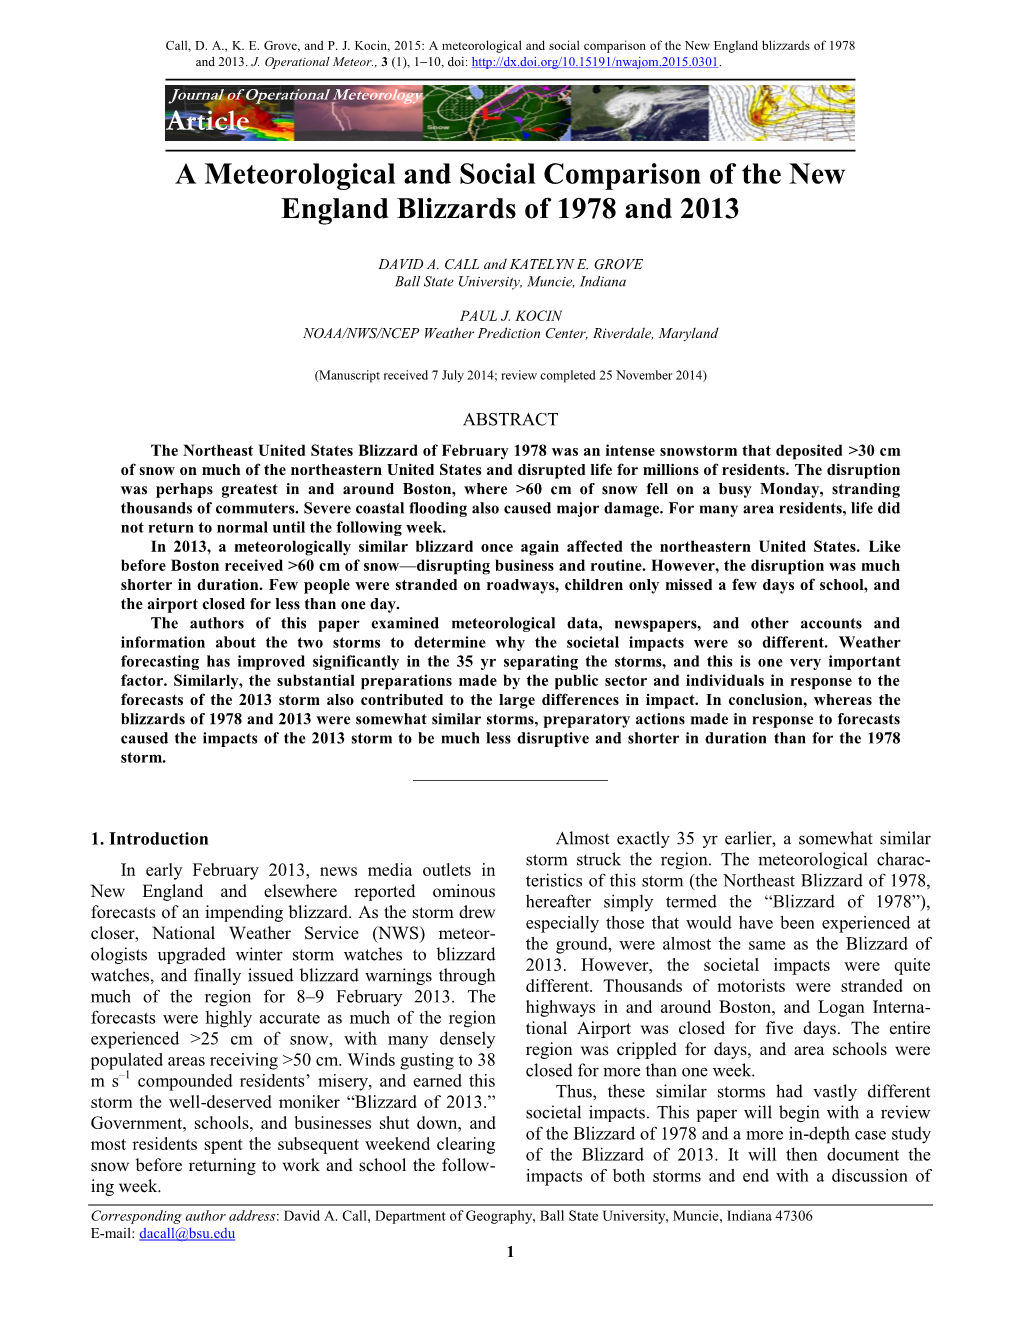 Article a Meteorological and Social Comparison of the New England